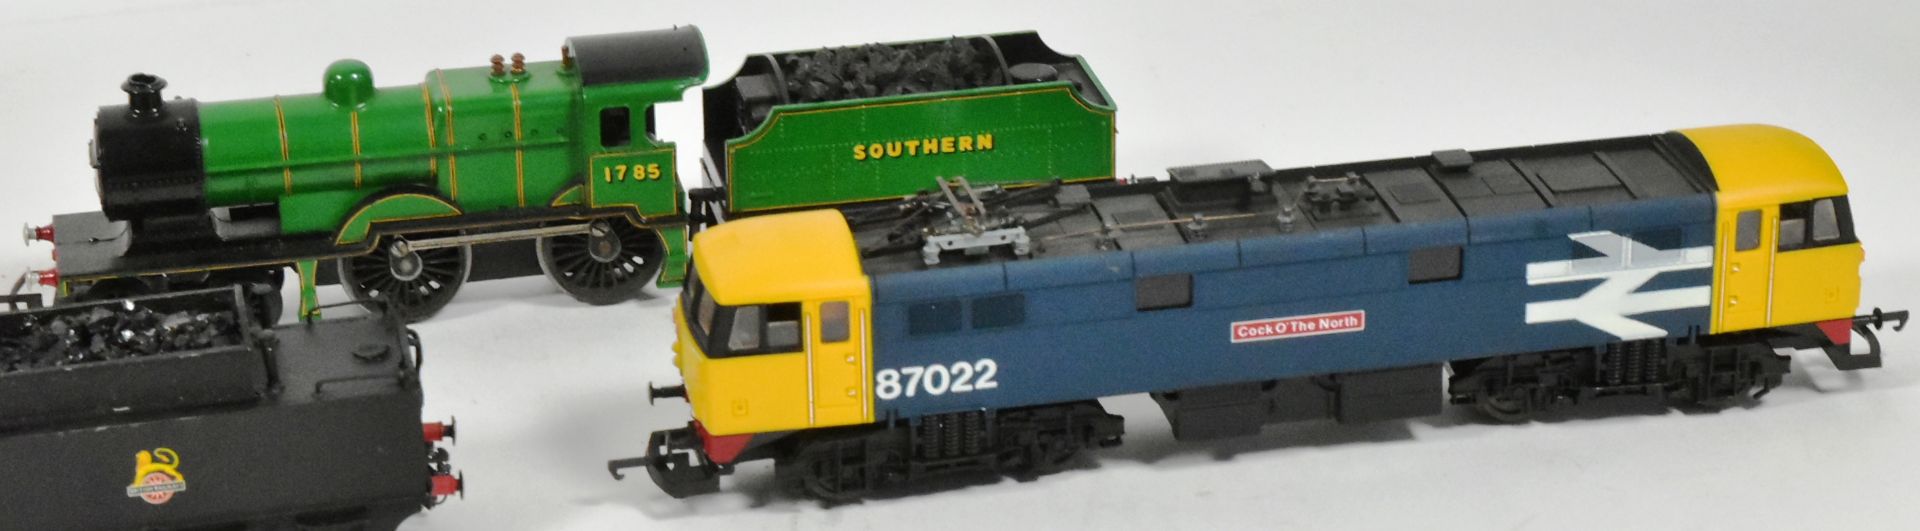 MODEL RAILWAY - COLLECTION OF ASSORTED LOCOMOTIVES - Image 5 of 5